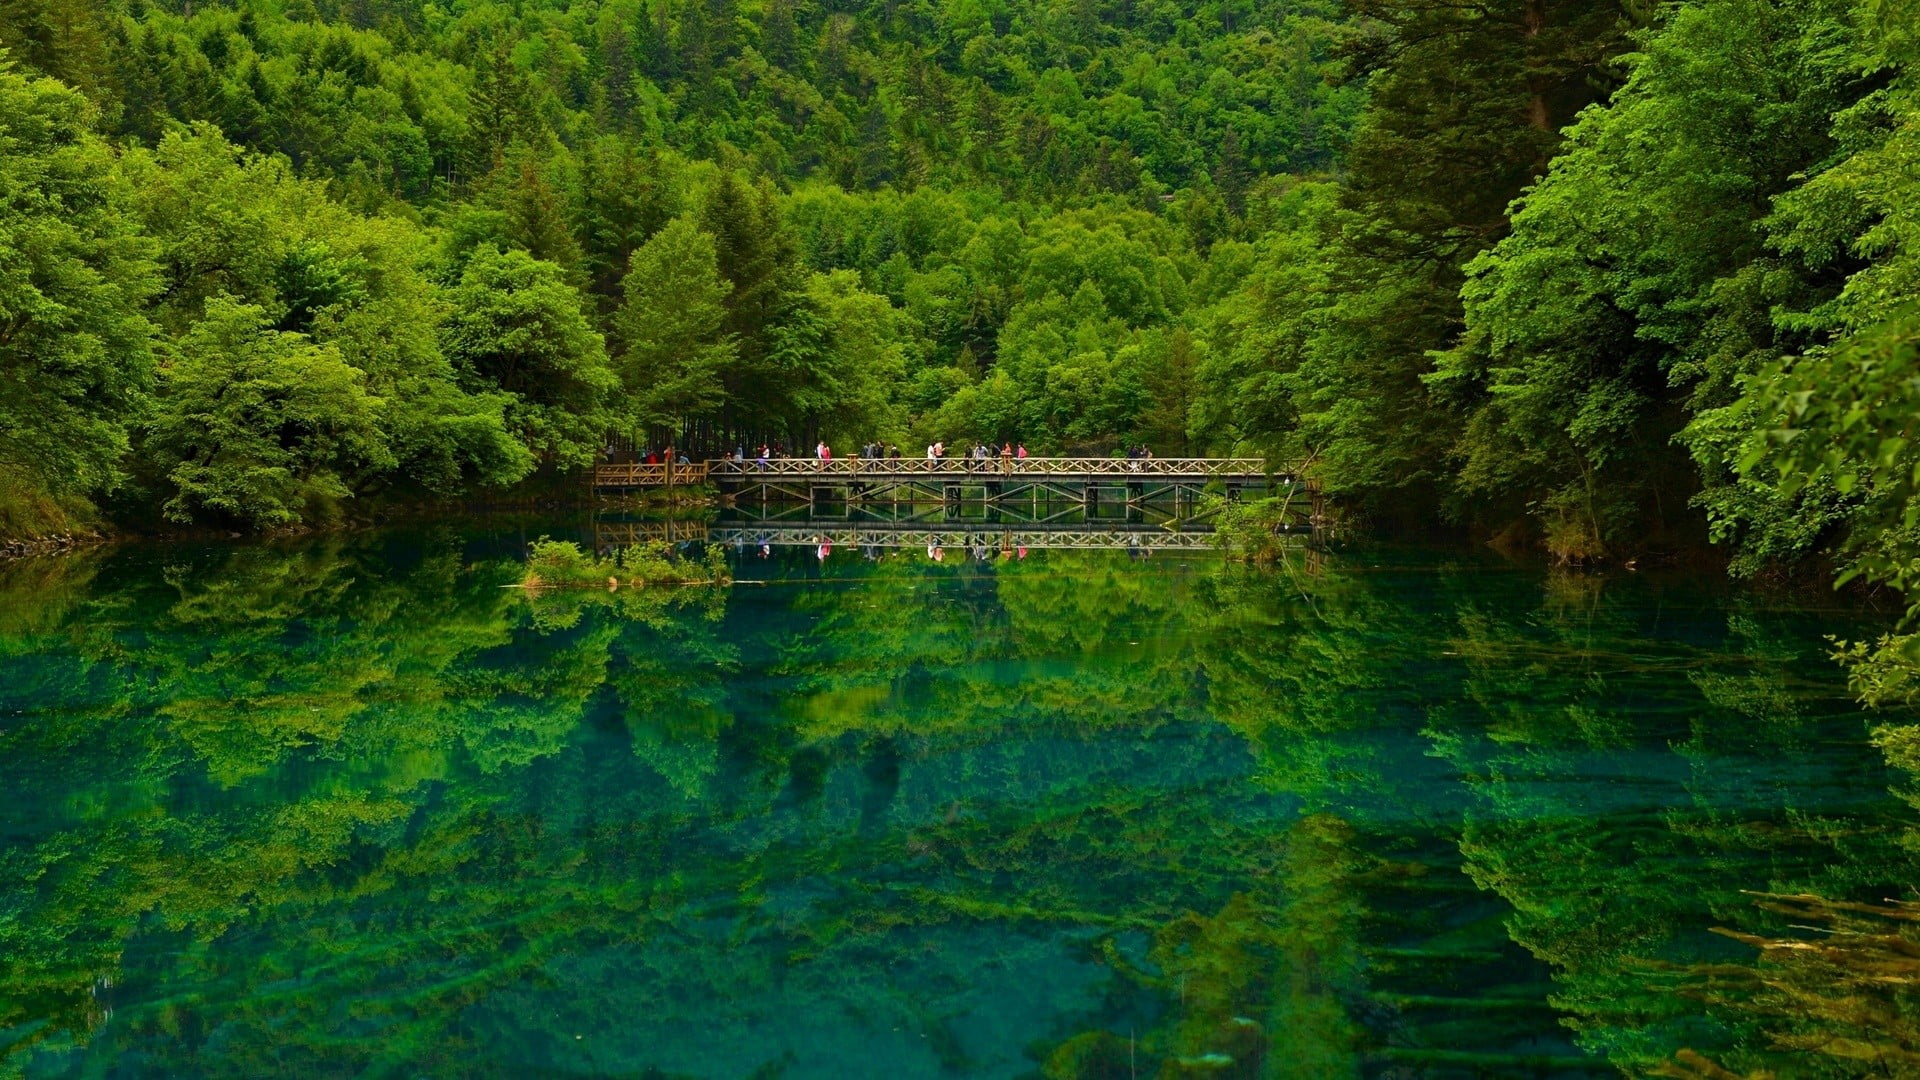 green leafed trees, nature, landscape, forest, China, lake, water